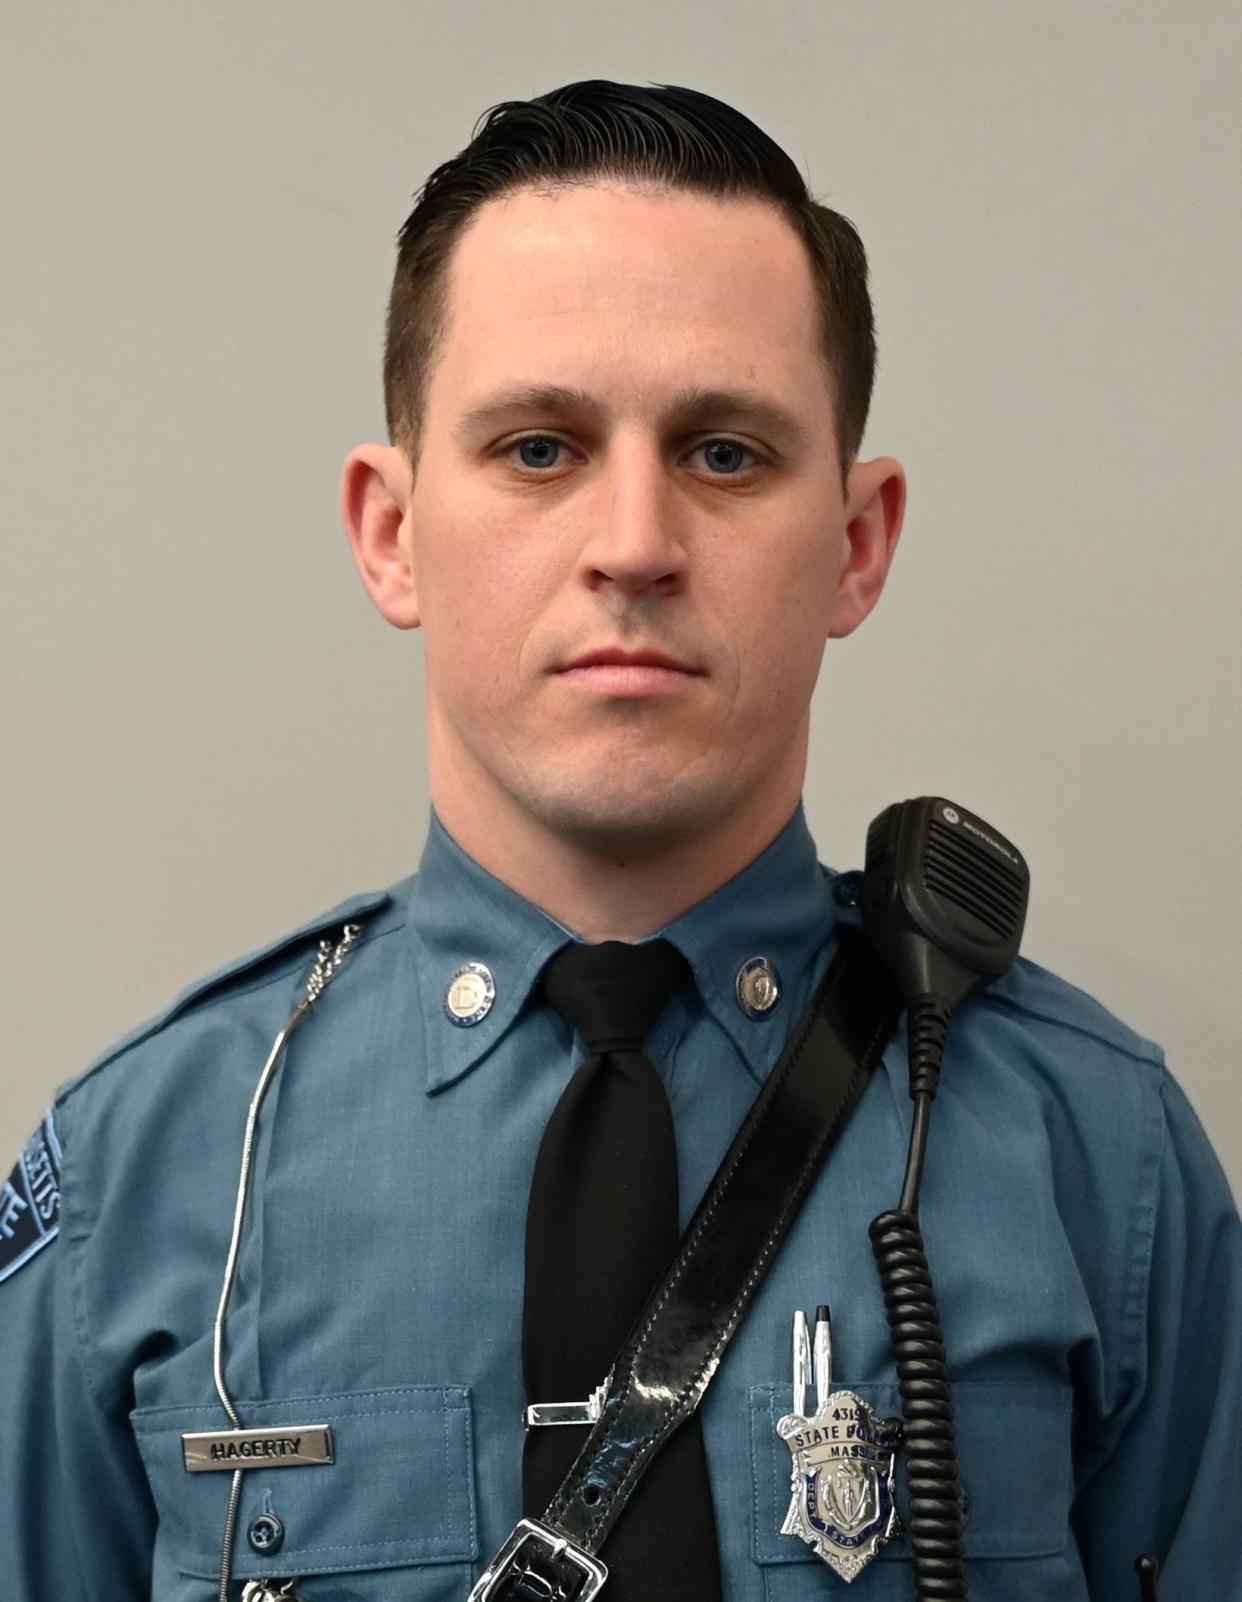 Massachusetts State Police Trooper John Hagerty rescued a man from a burning home on West Grove Street in Middleboro on Tuesday, Feb. 22, 2022.